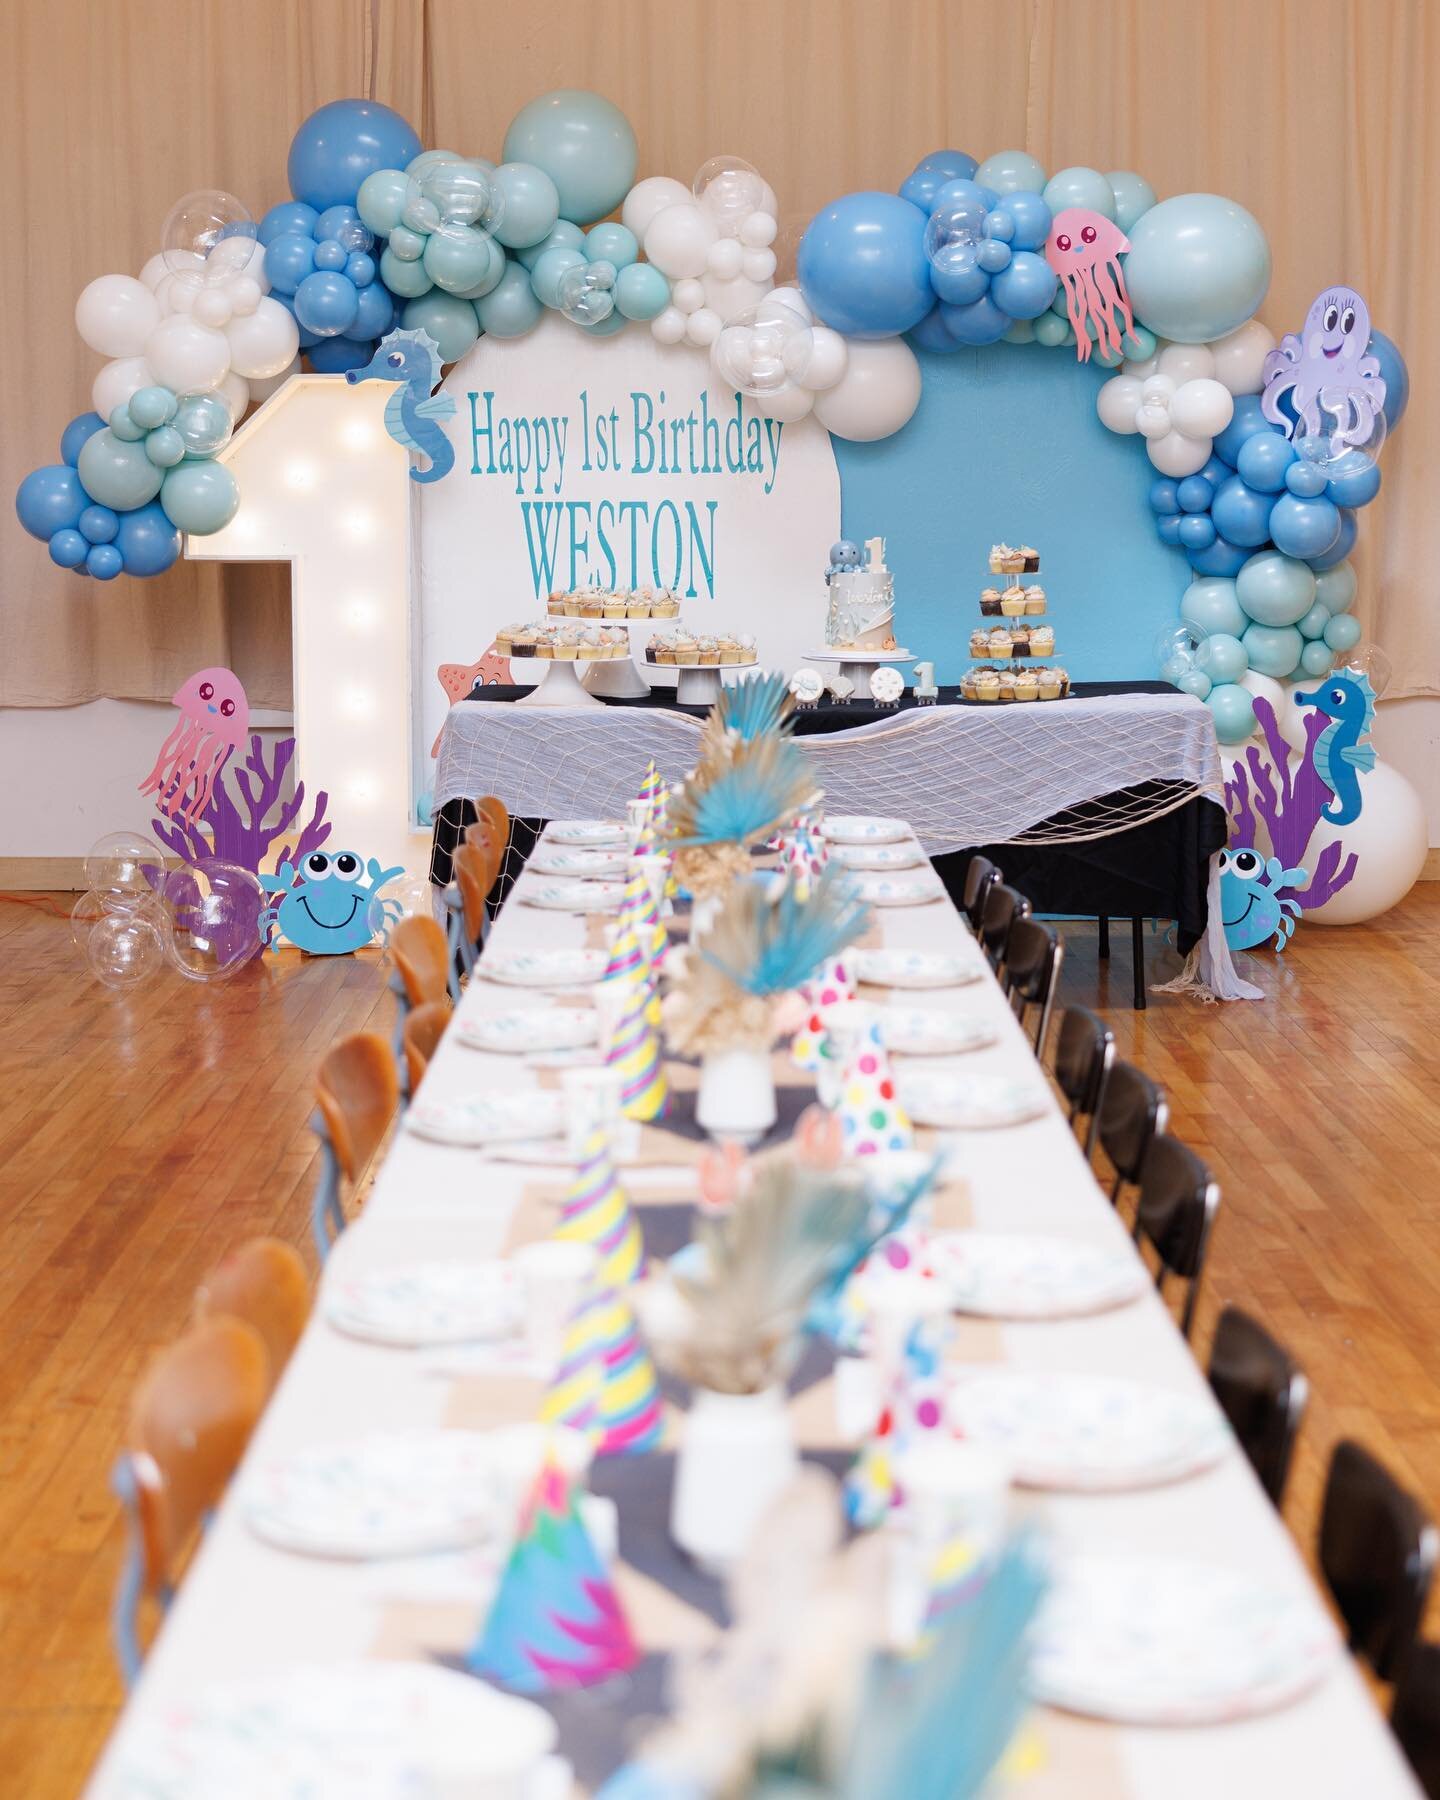 Weston&rsquo;s Under the Sea First Birthday Bash 🐳✨

📸 @wil002

#firstbirthdayparty #philadelphiaevents #tabledetails #tablescapes #tabledecor #undertheseaparty #phillyevents #eventdesign #luxuryevents